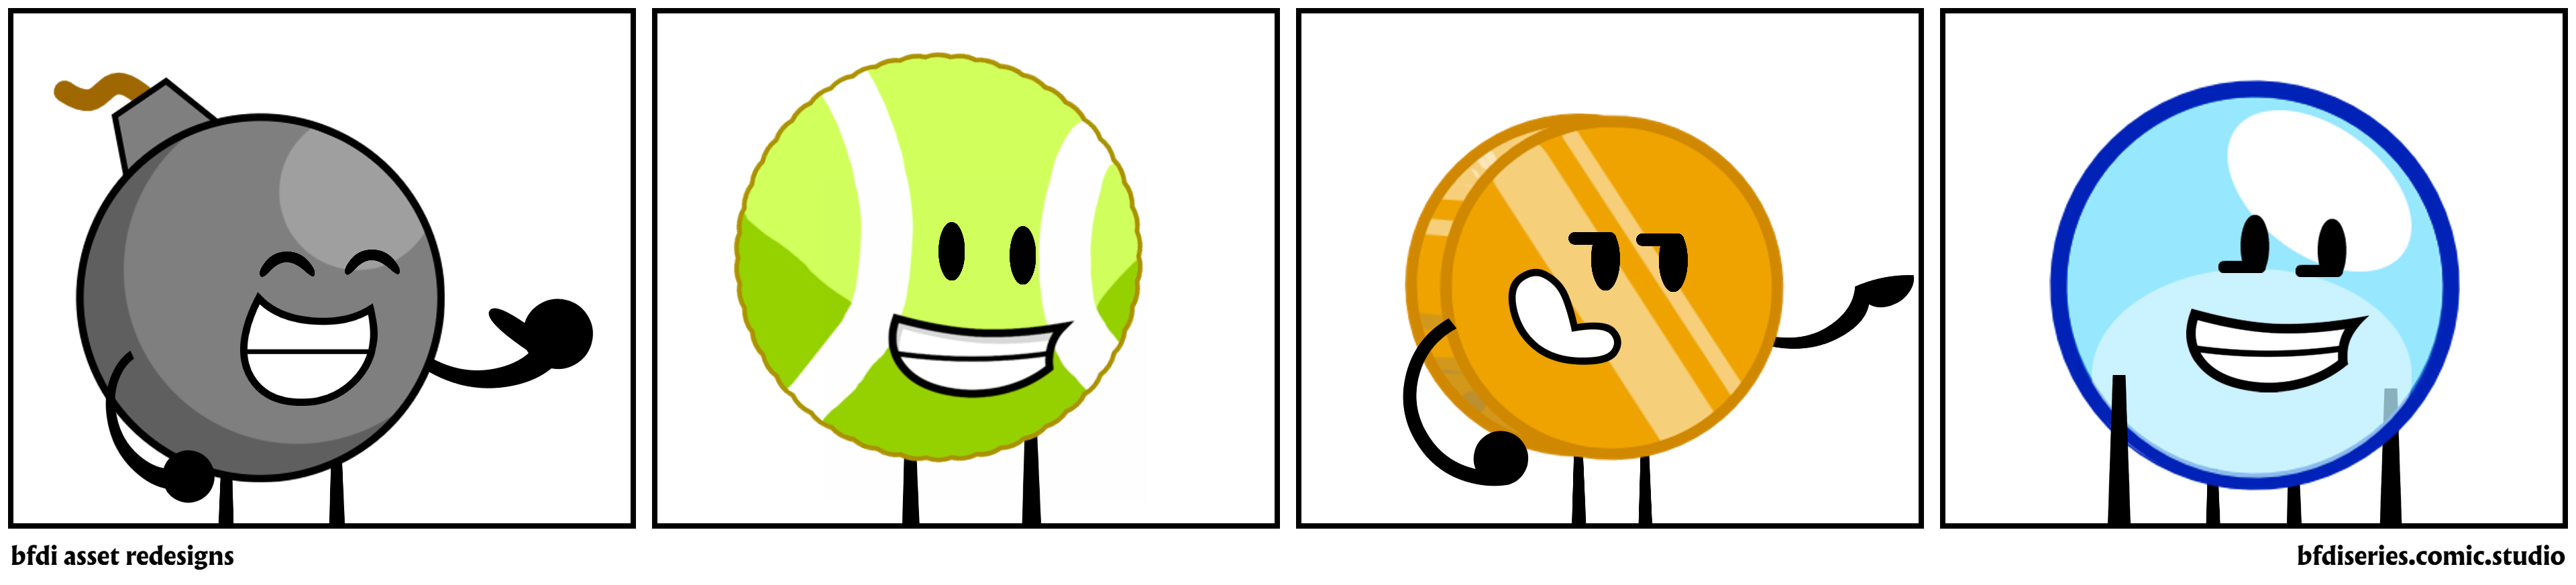 bfdi asset redesigns